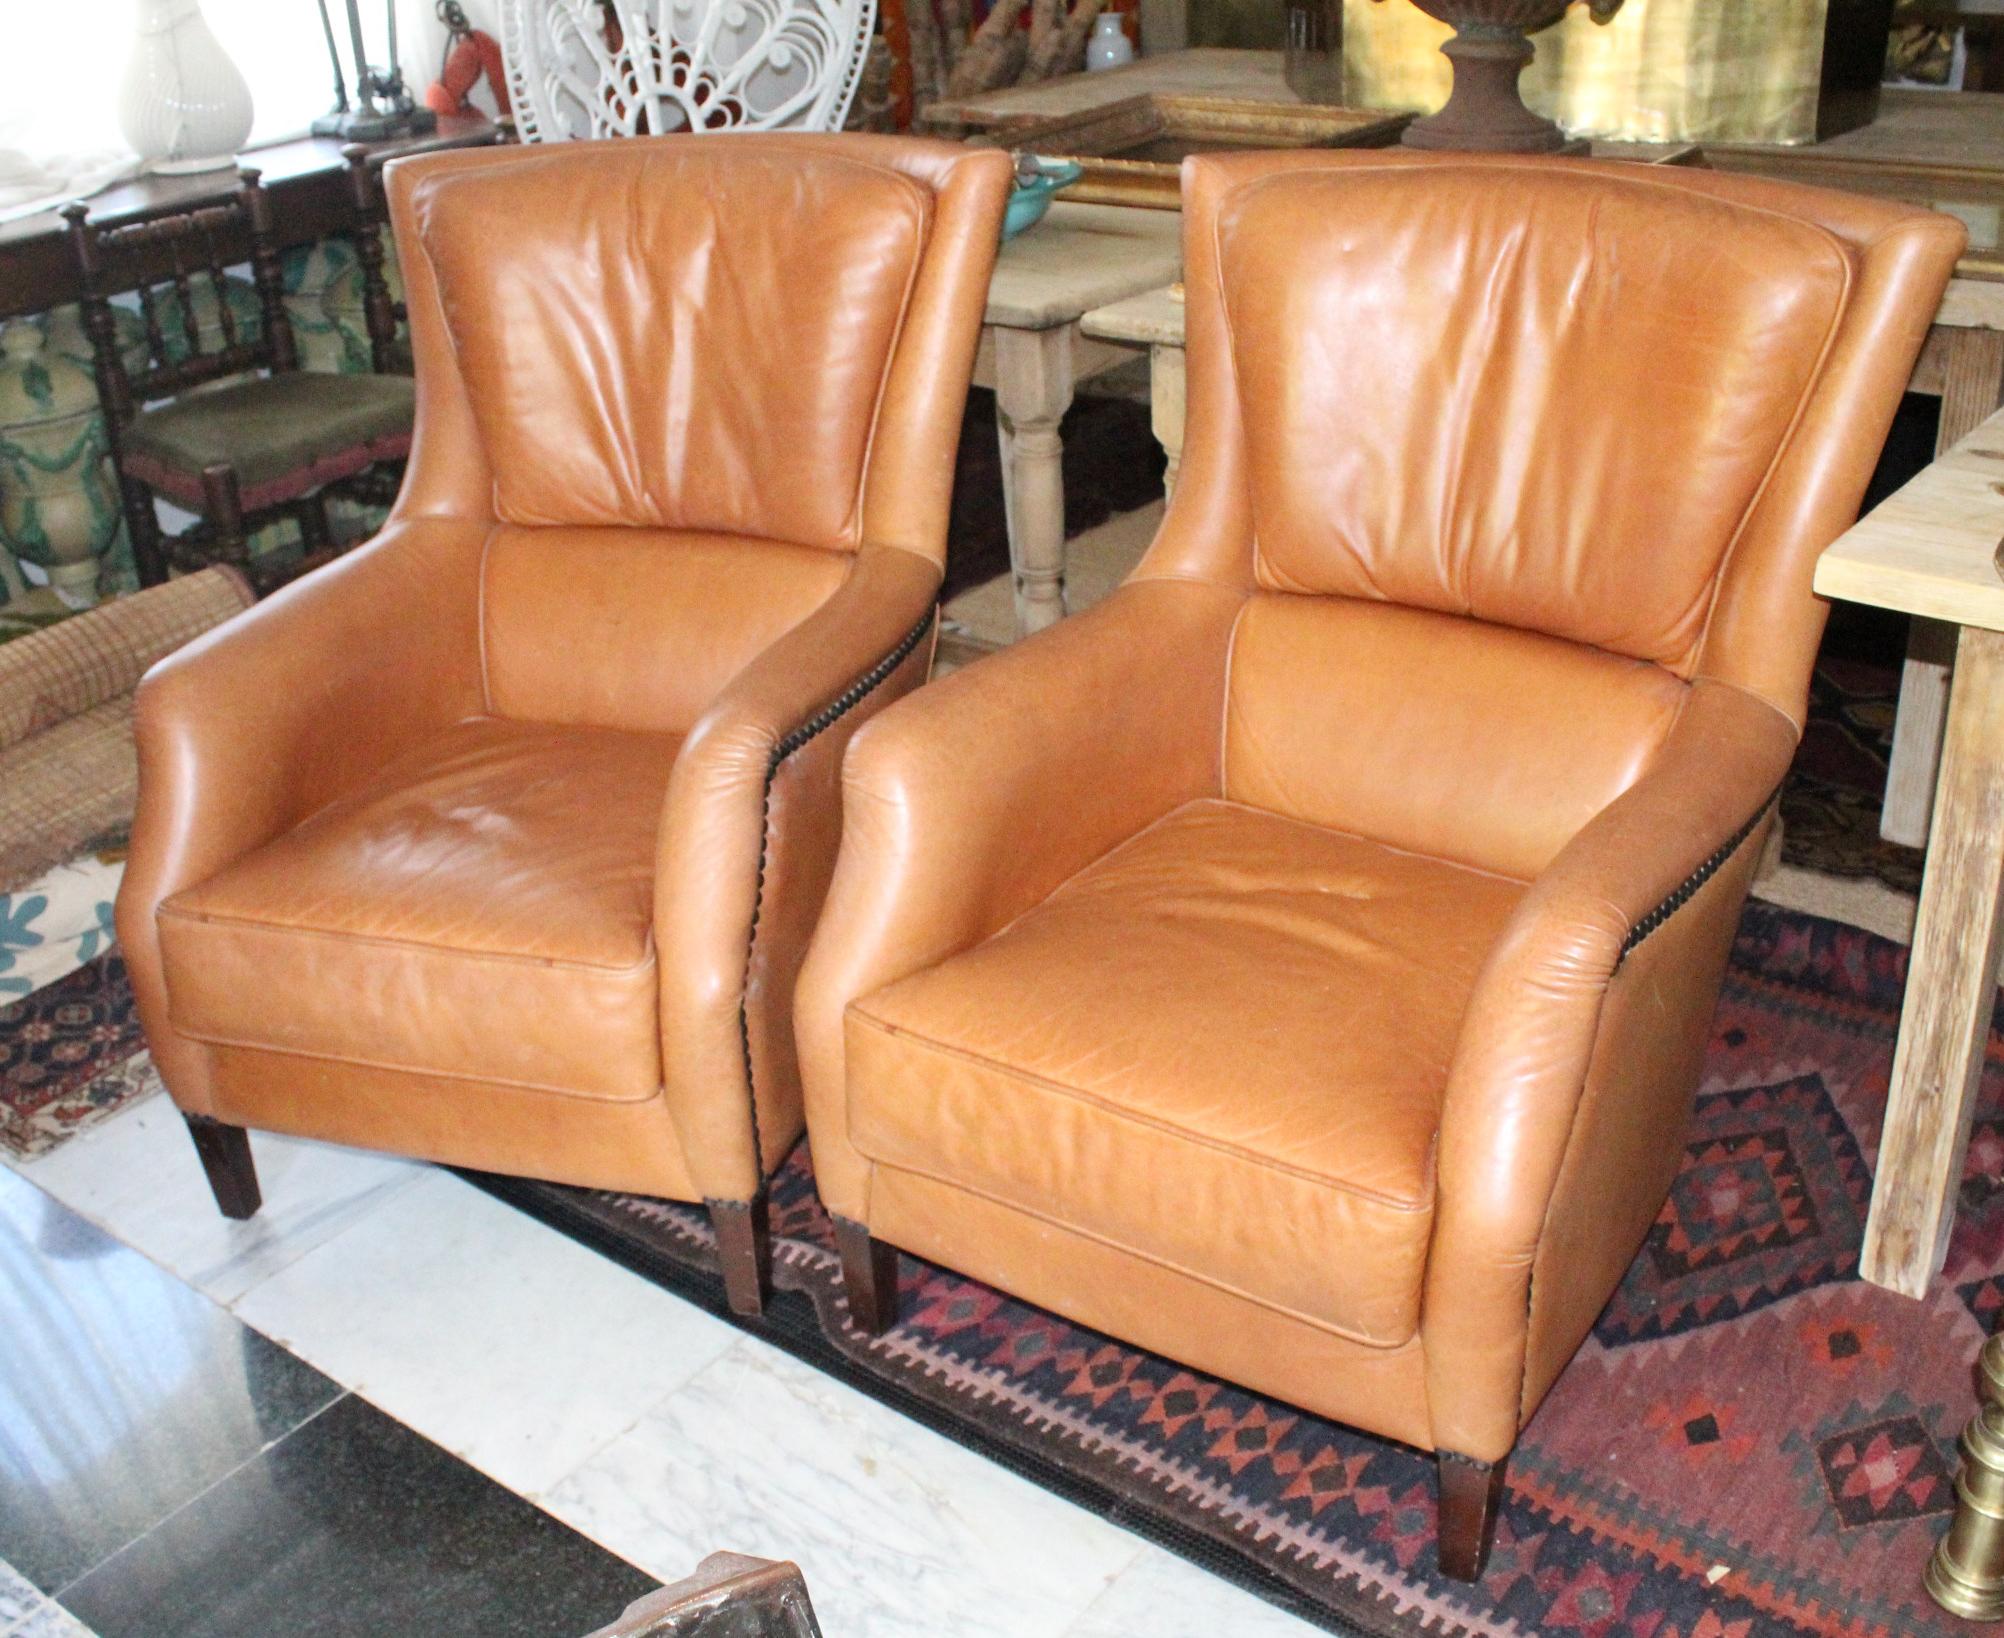 1980s pair of Spanish leather armchairs in very good condition, with wooden legs and decorative tacks.